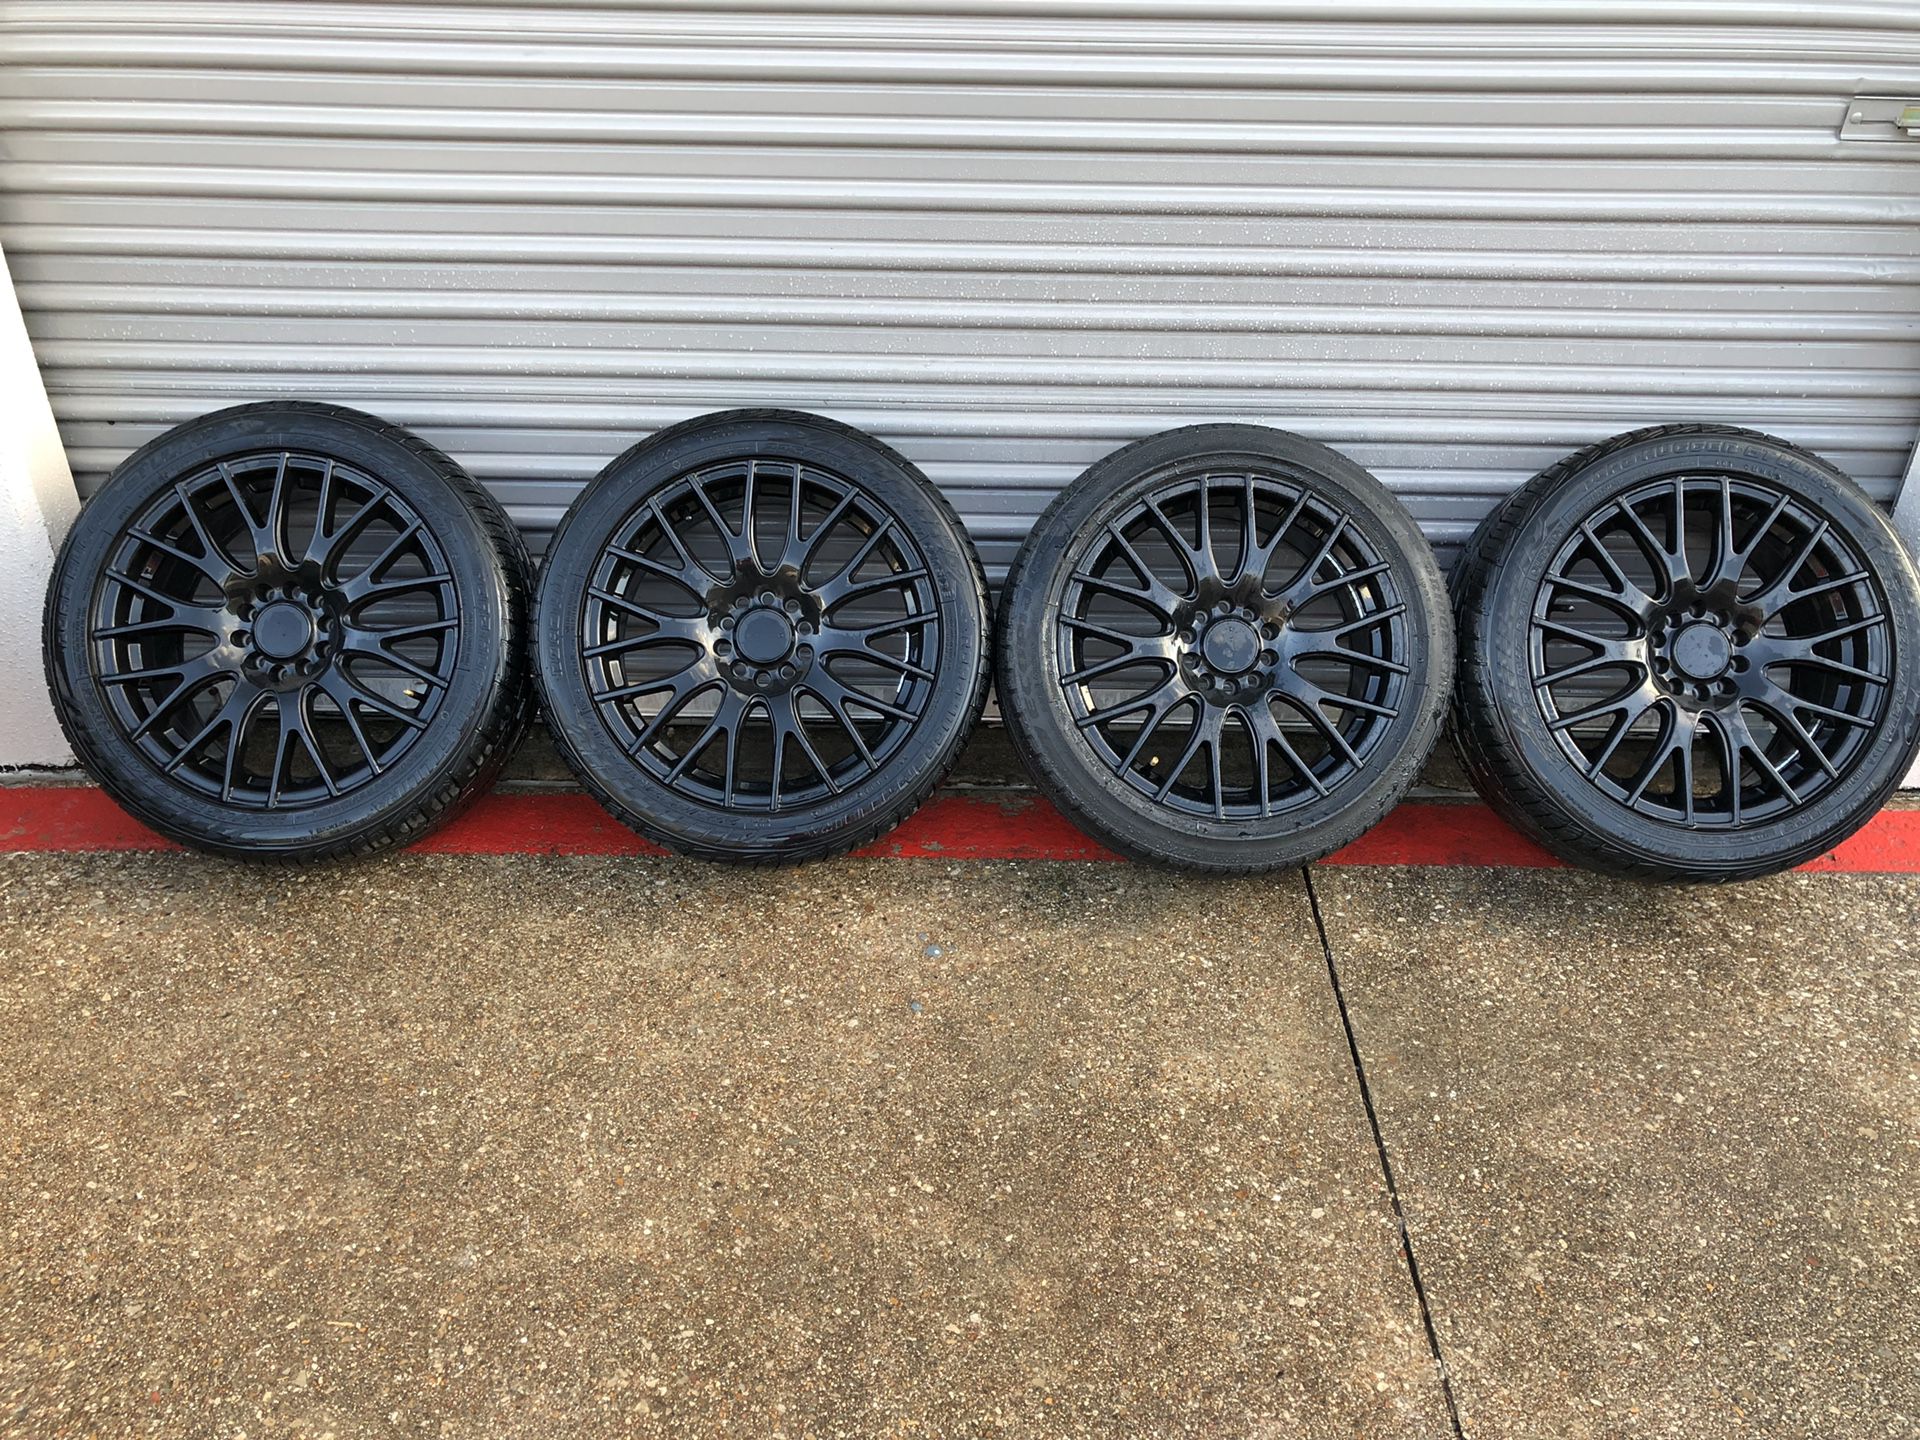 17” Drag black rims with tires